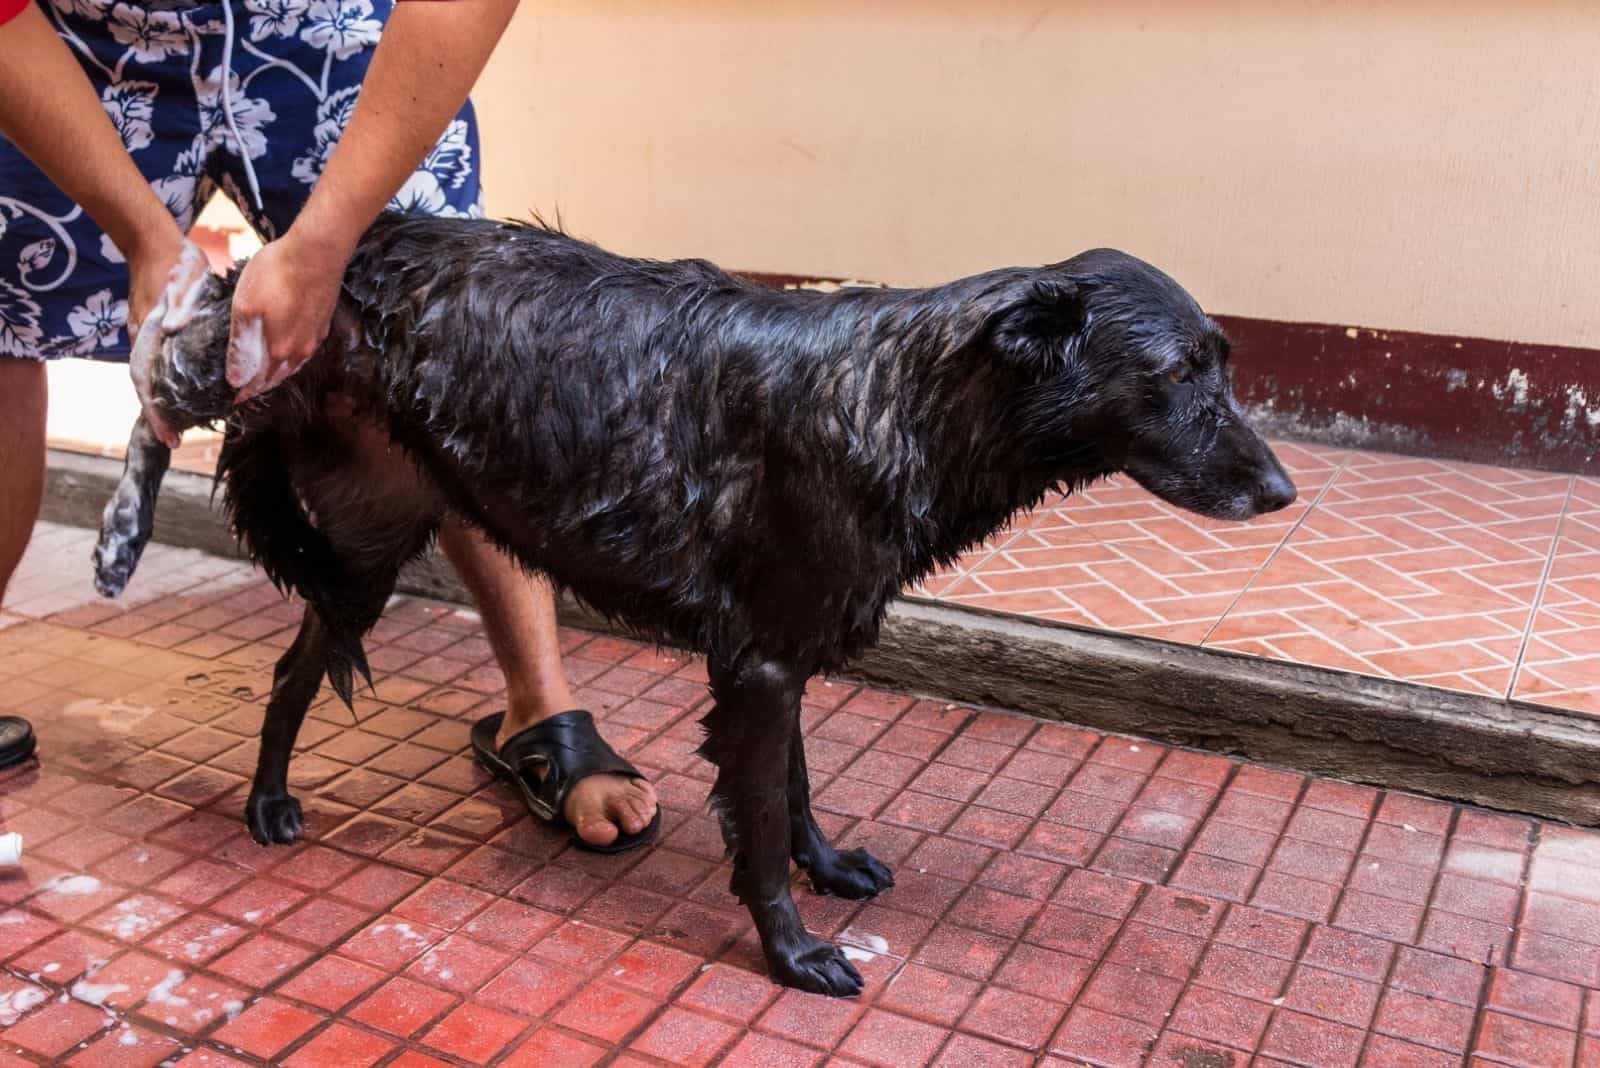 Black dog getting a bath with water by the owner